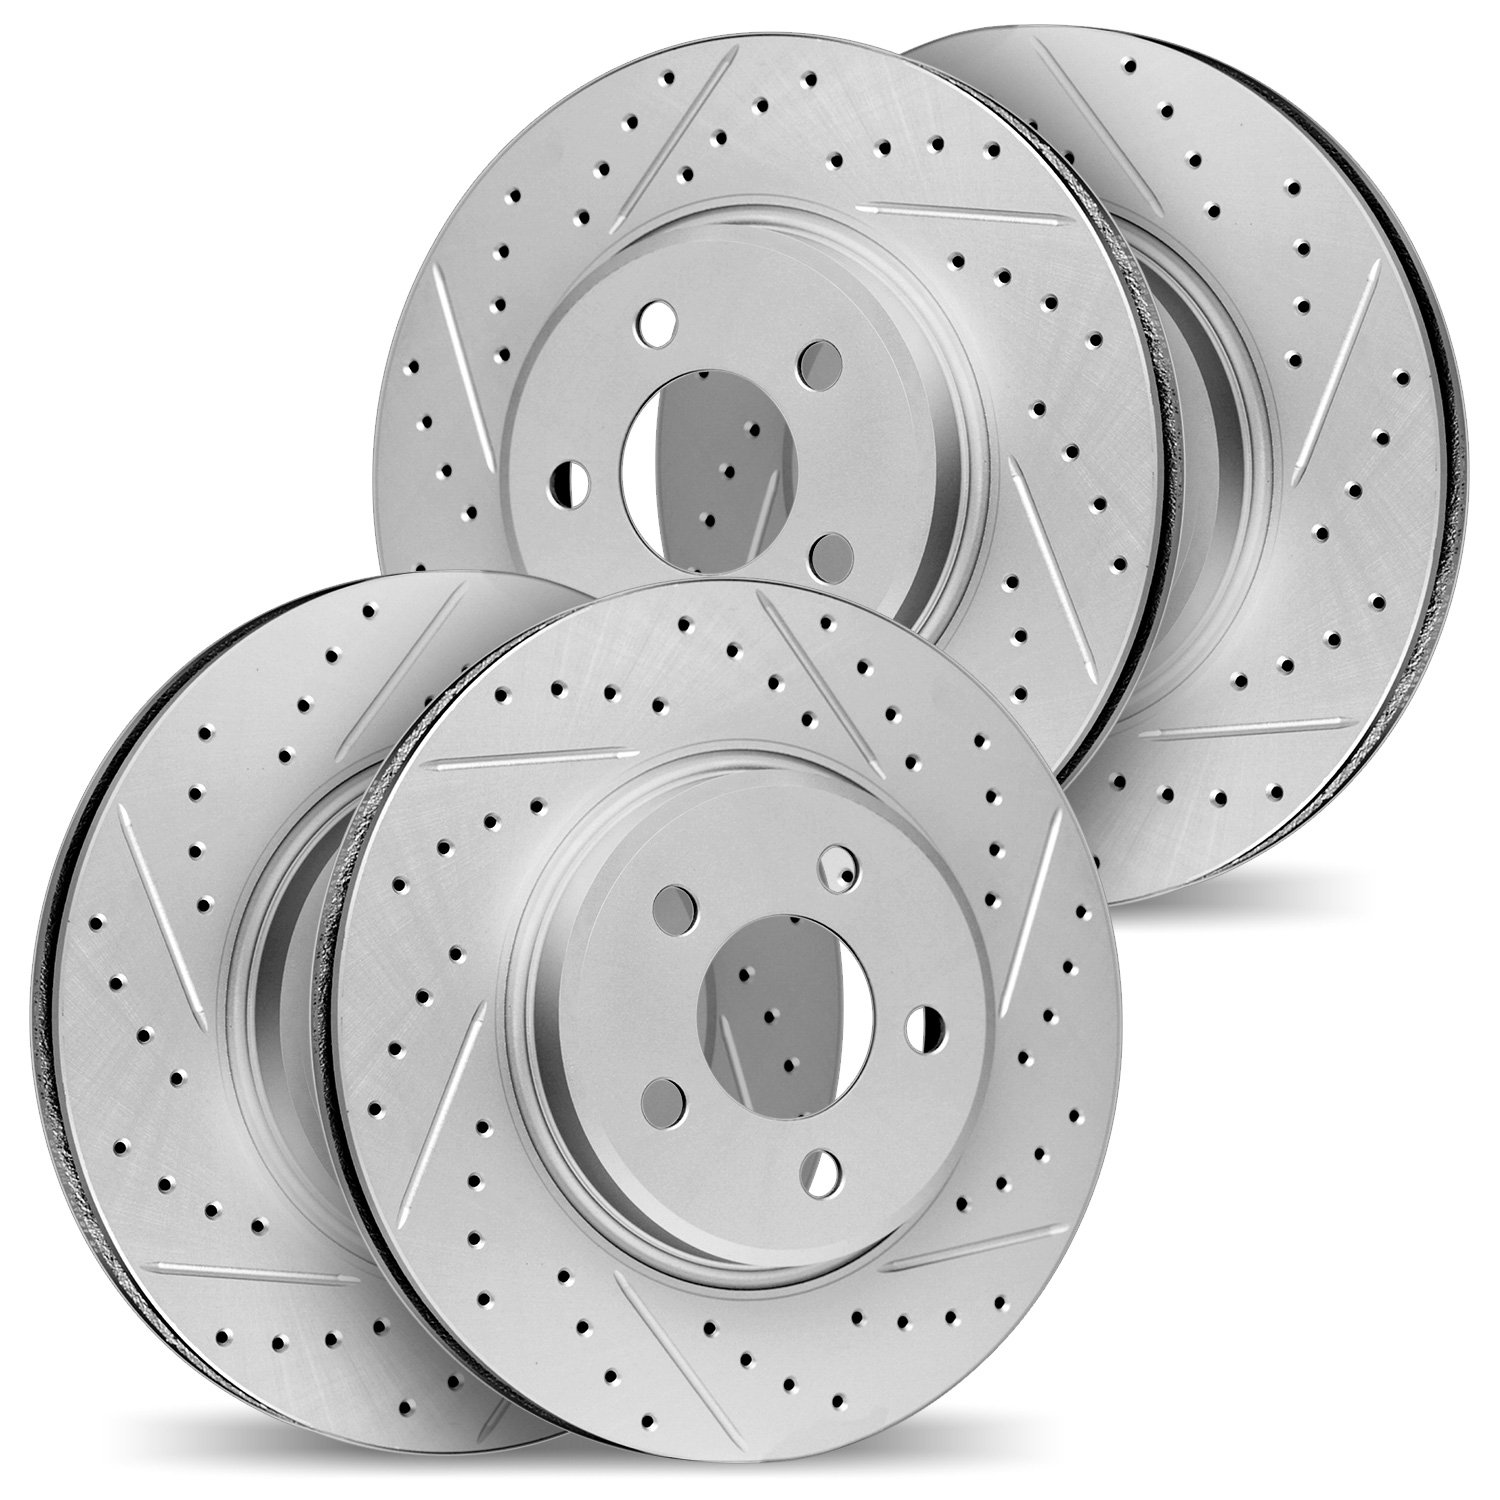 2004-13008 Geoperformance Drilled/Slotted Brake Rotors, 2017-2020 Multiple Makes/Models, Position: Front and Rear